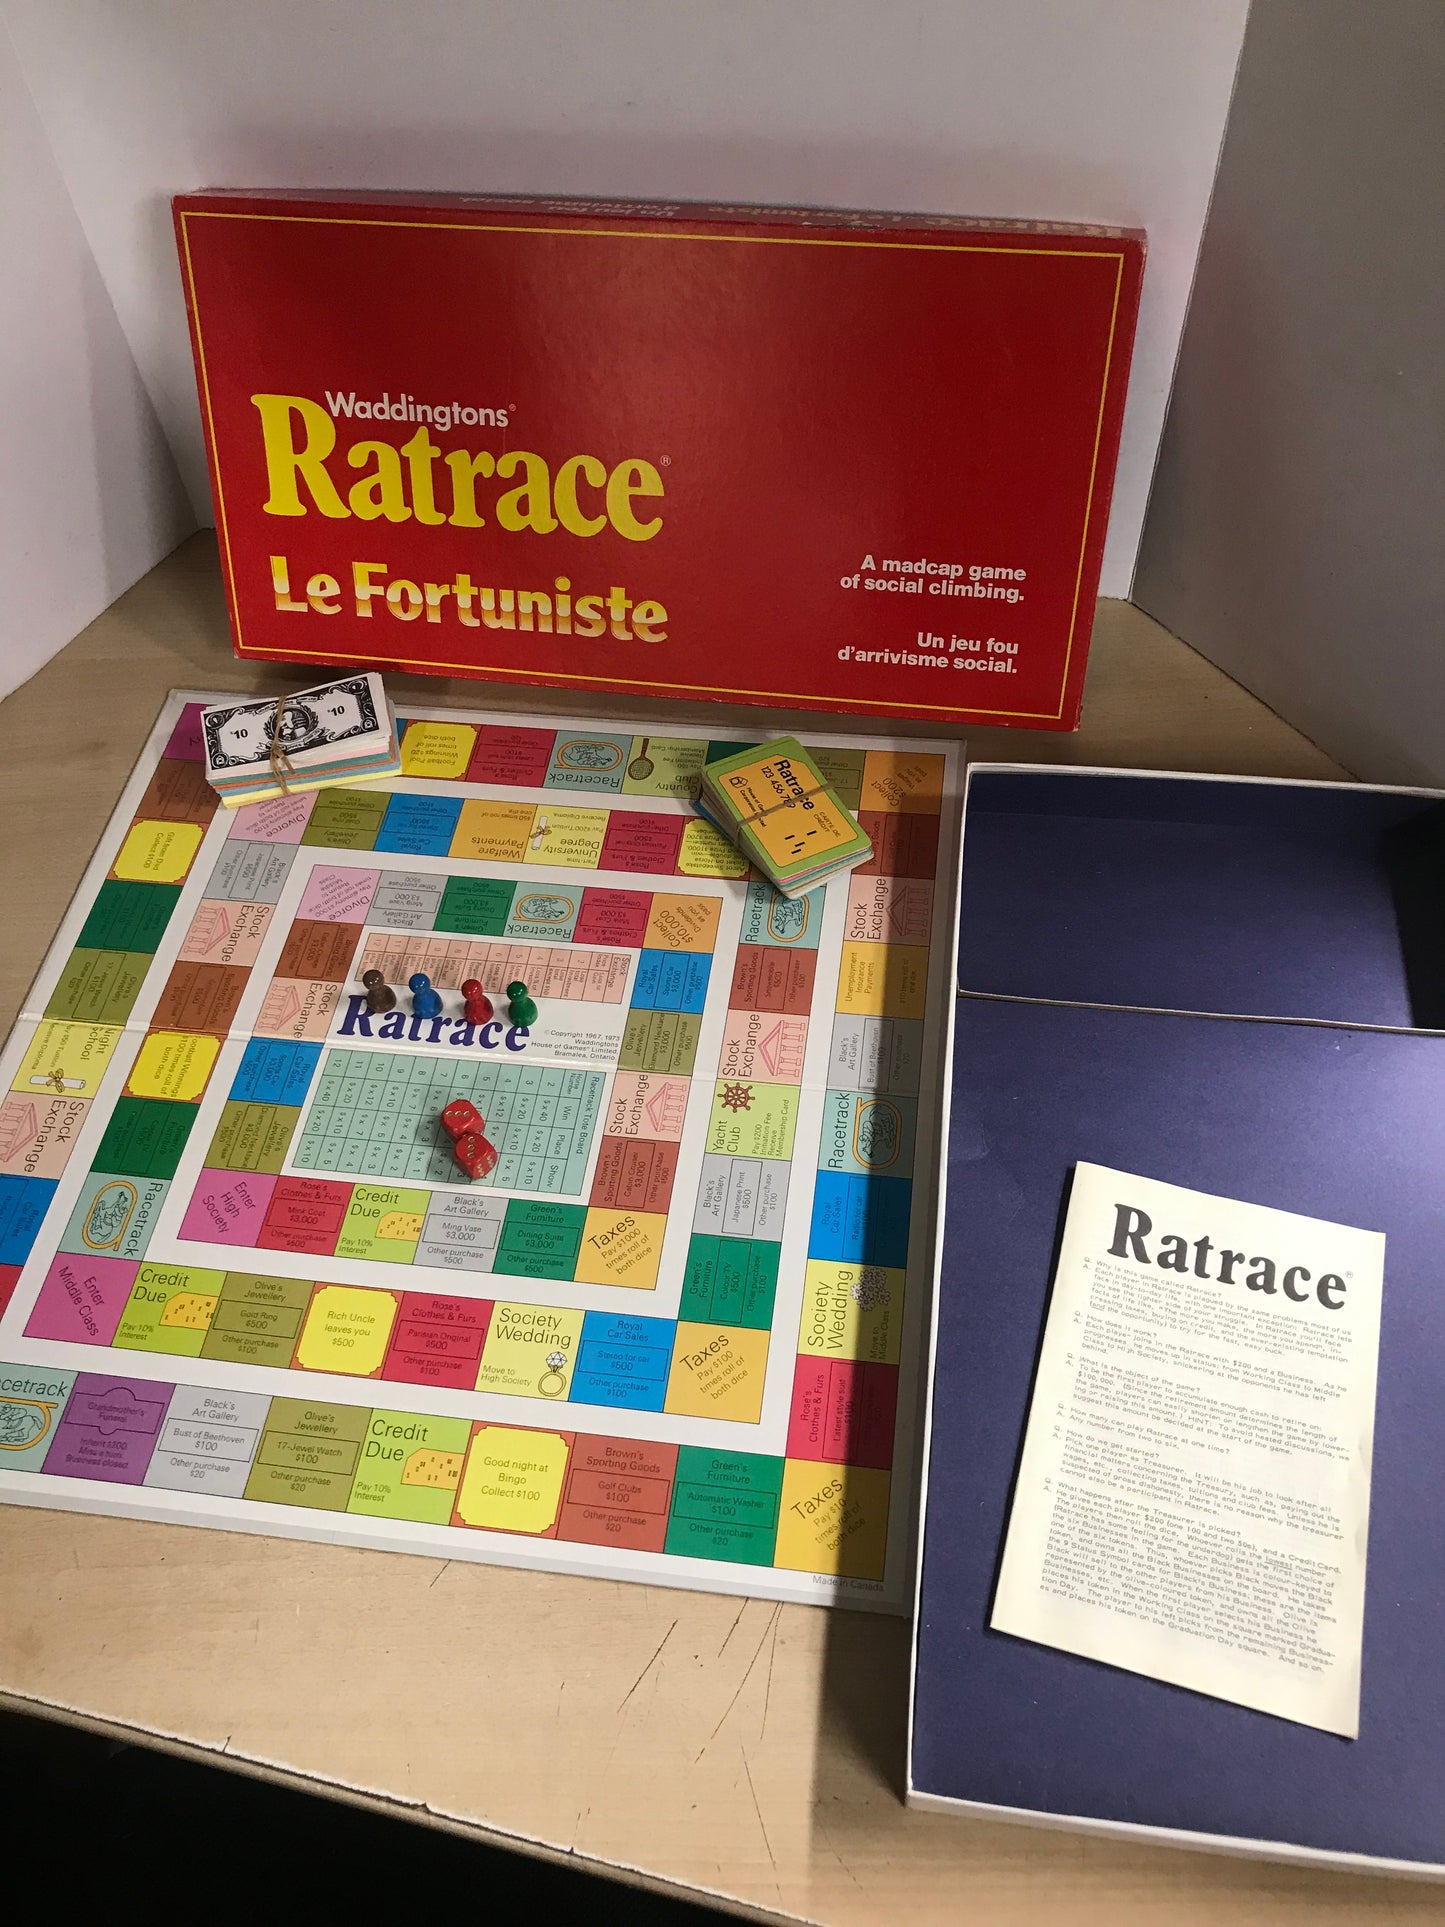 Game 1974 Vintage RATRACE Rat Race Board Game Waddingtons COMPLETE Bilingual As New RARE